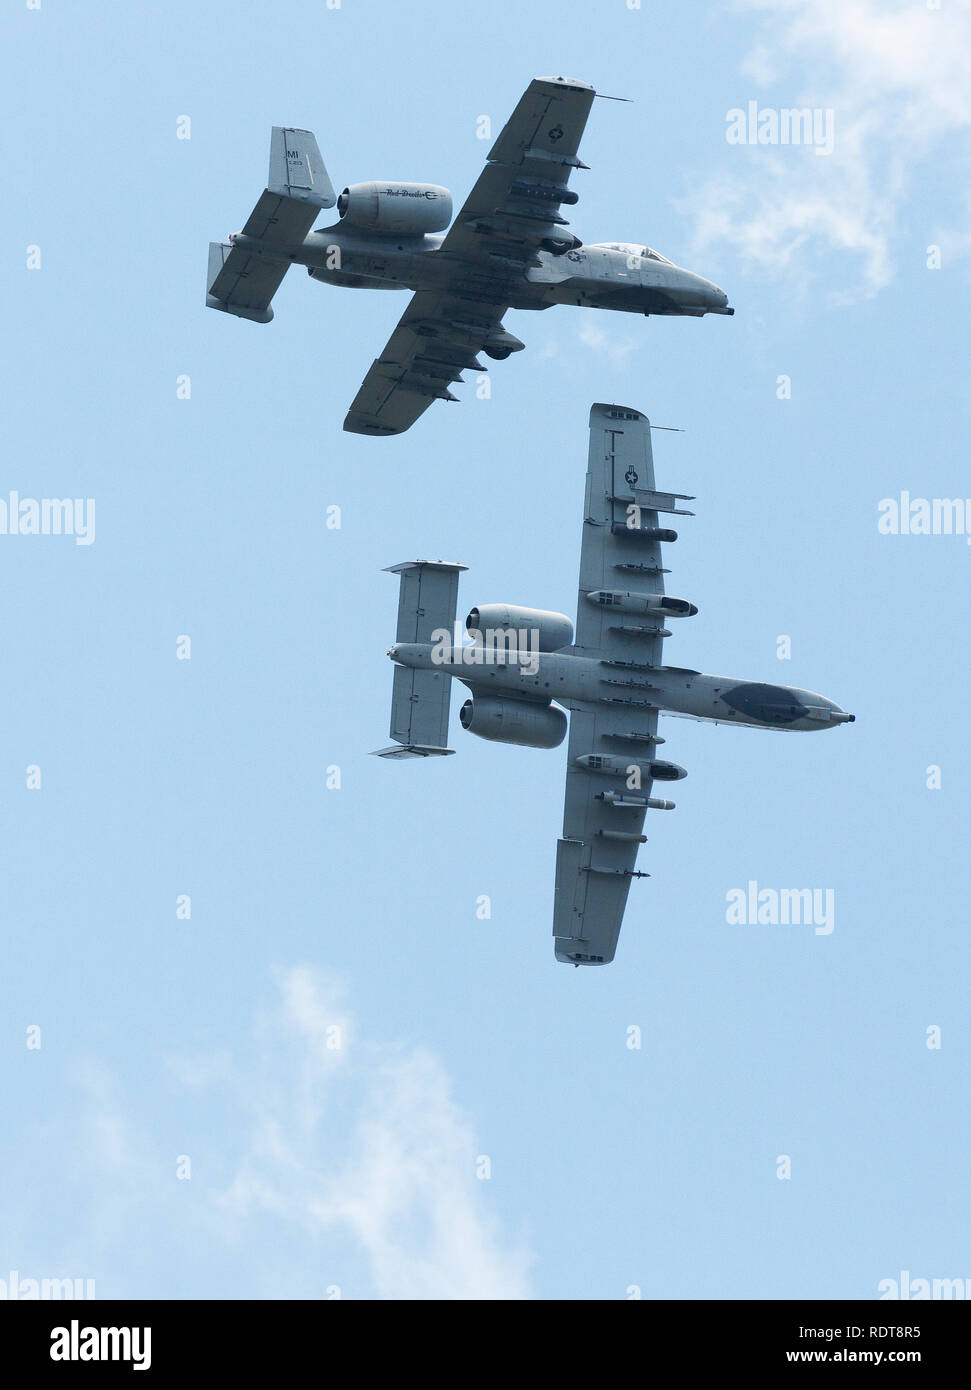 A-10 Thunderbolt II known as the Warthog is the US Air Force twin engine jet with Avenger gatling gun flying at air show Stock Photo